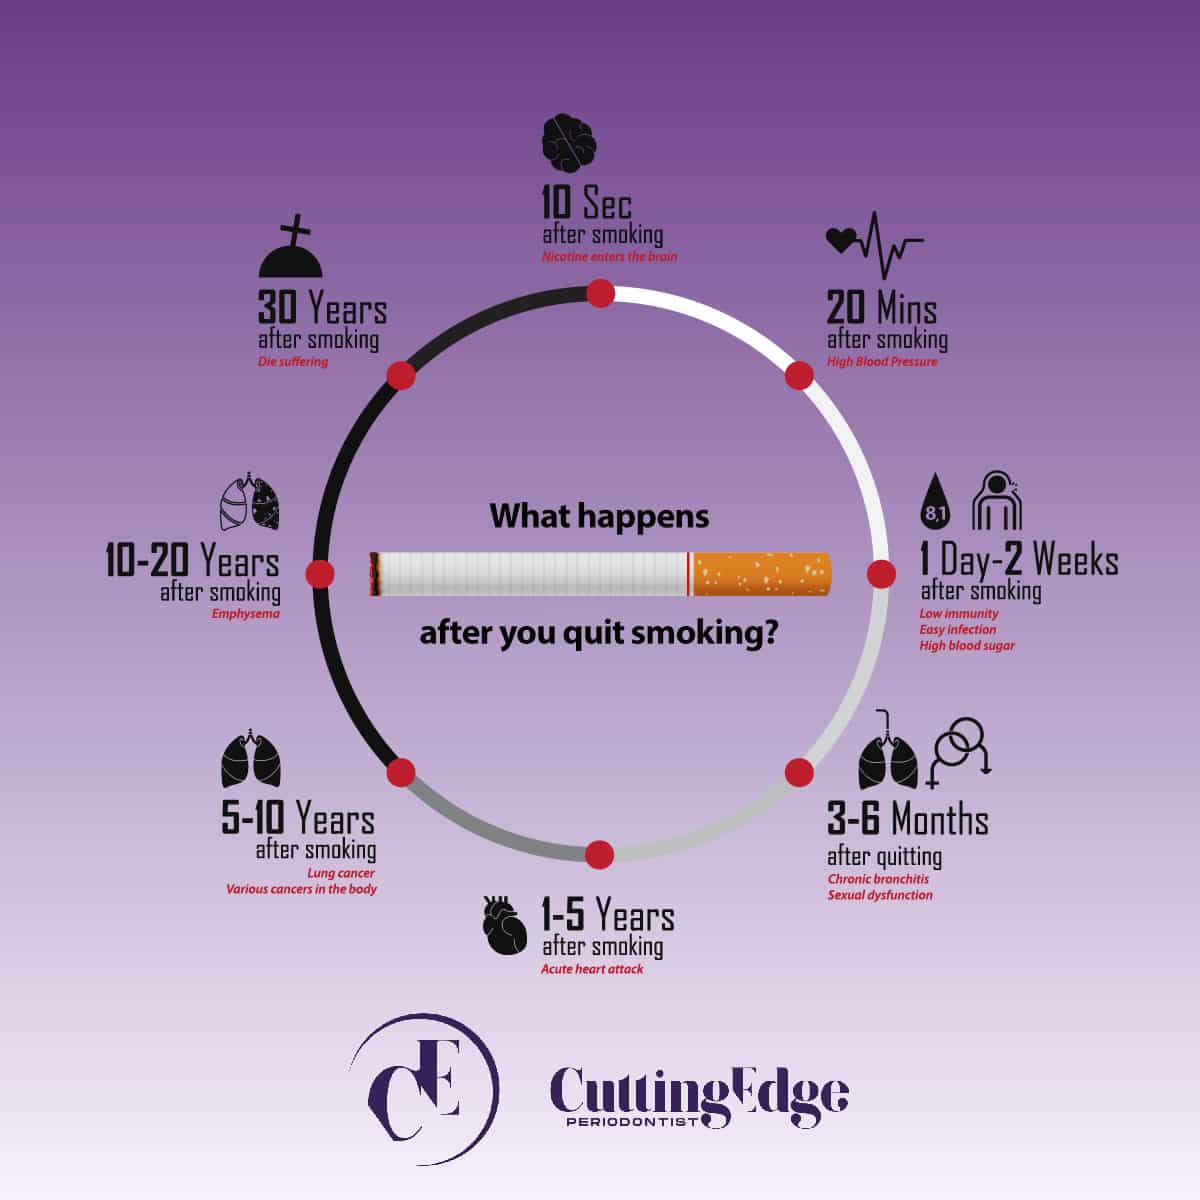 What happens after you quit smoking?